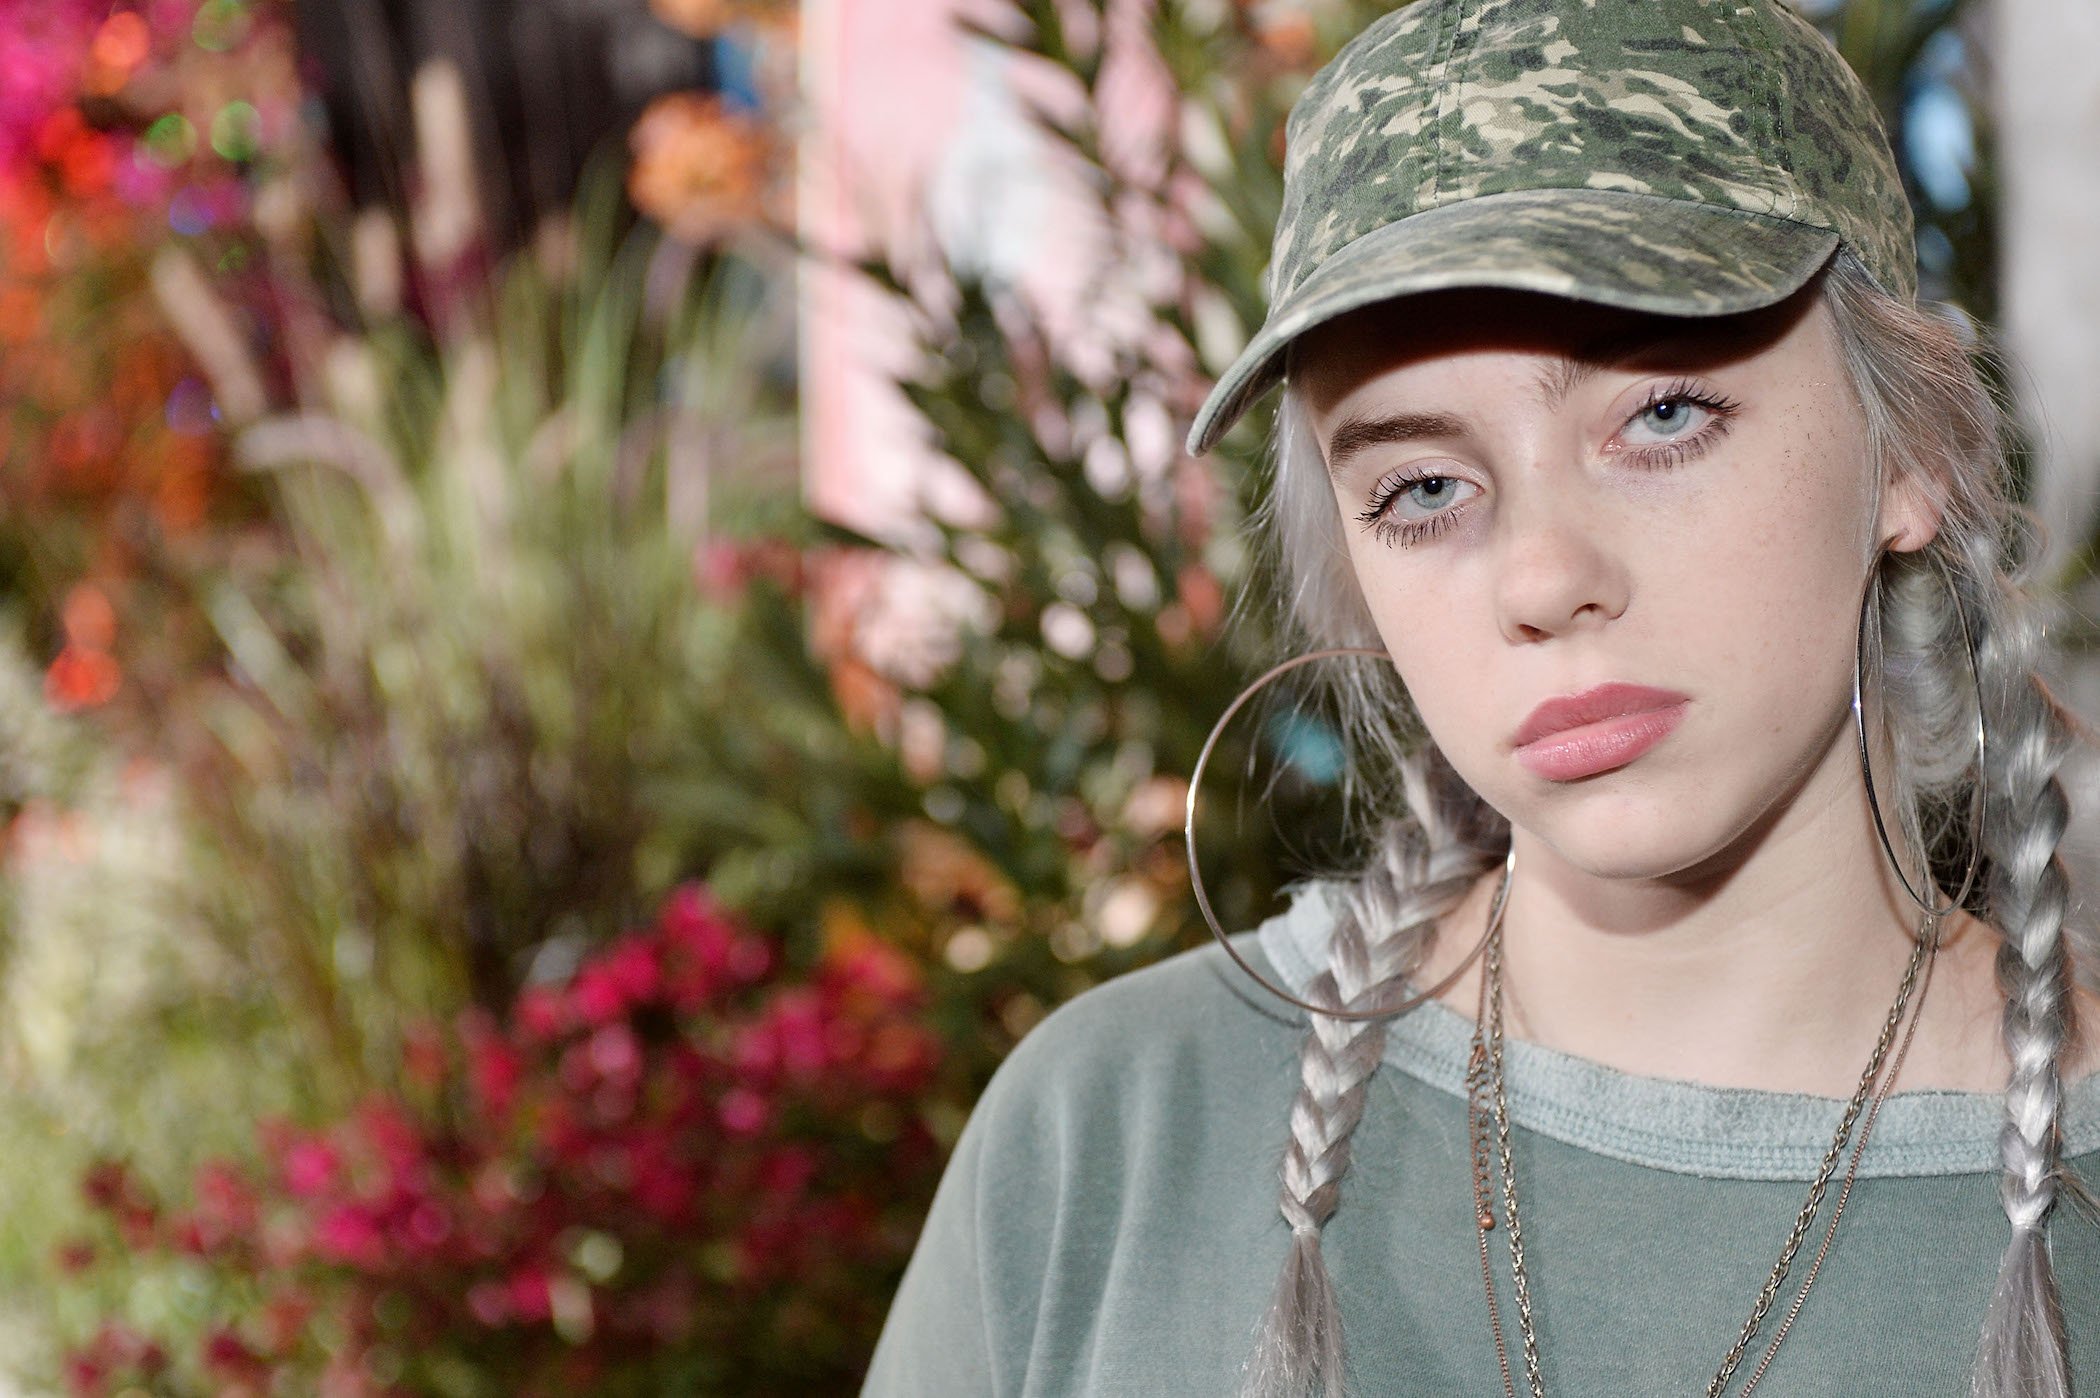 A close-up of Billie Eilish wearing a camo hat and a green shirt at a Teen Vogue event